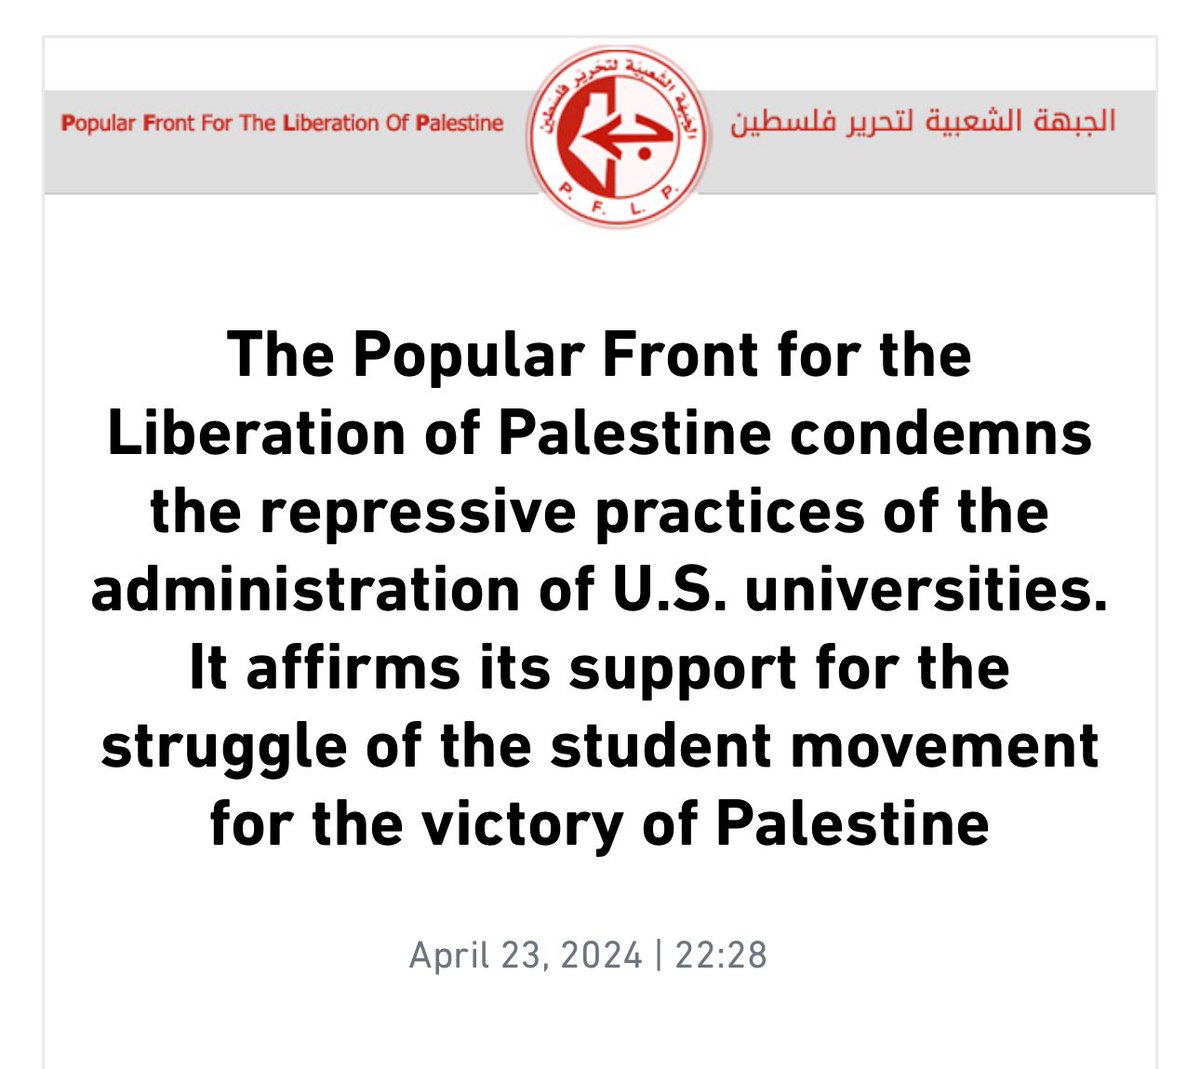 When a terror organisations support your couse... @Columbia pro #Hamas student movement, PFLP has your back